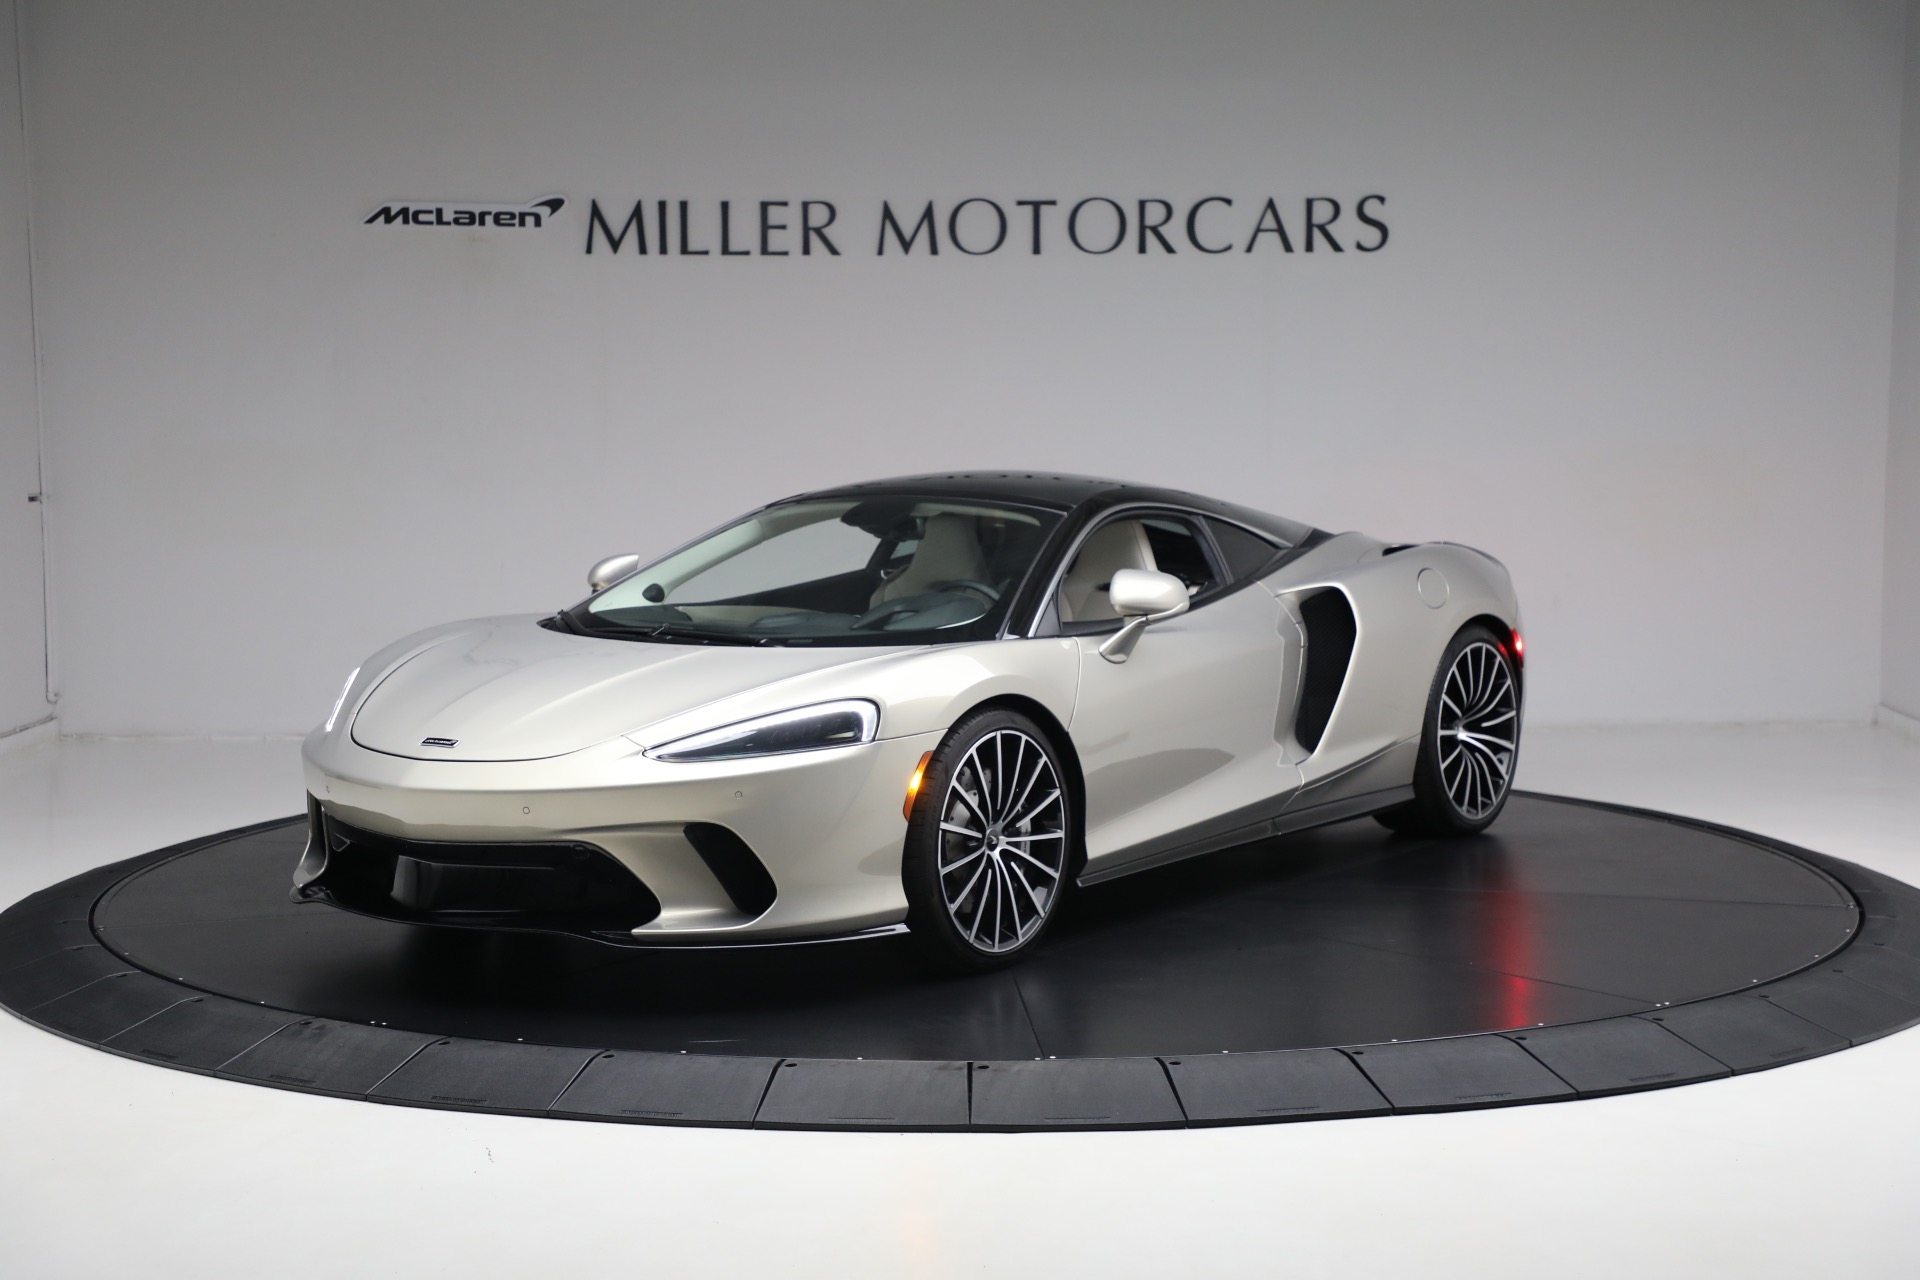 Used 2020 McLaren GT Luxe for sale $169,900 at Maserati of Greenwich in Greenwich CT 06830 1